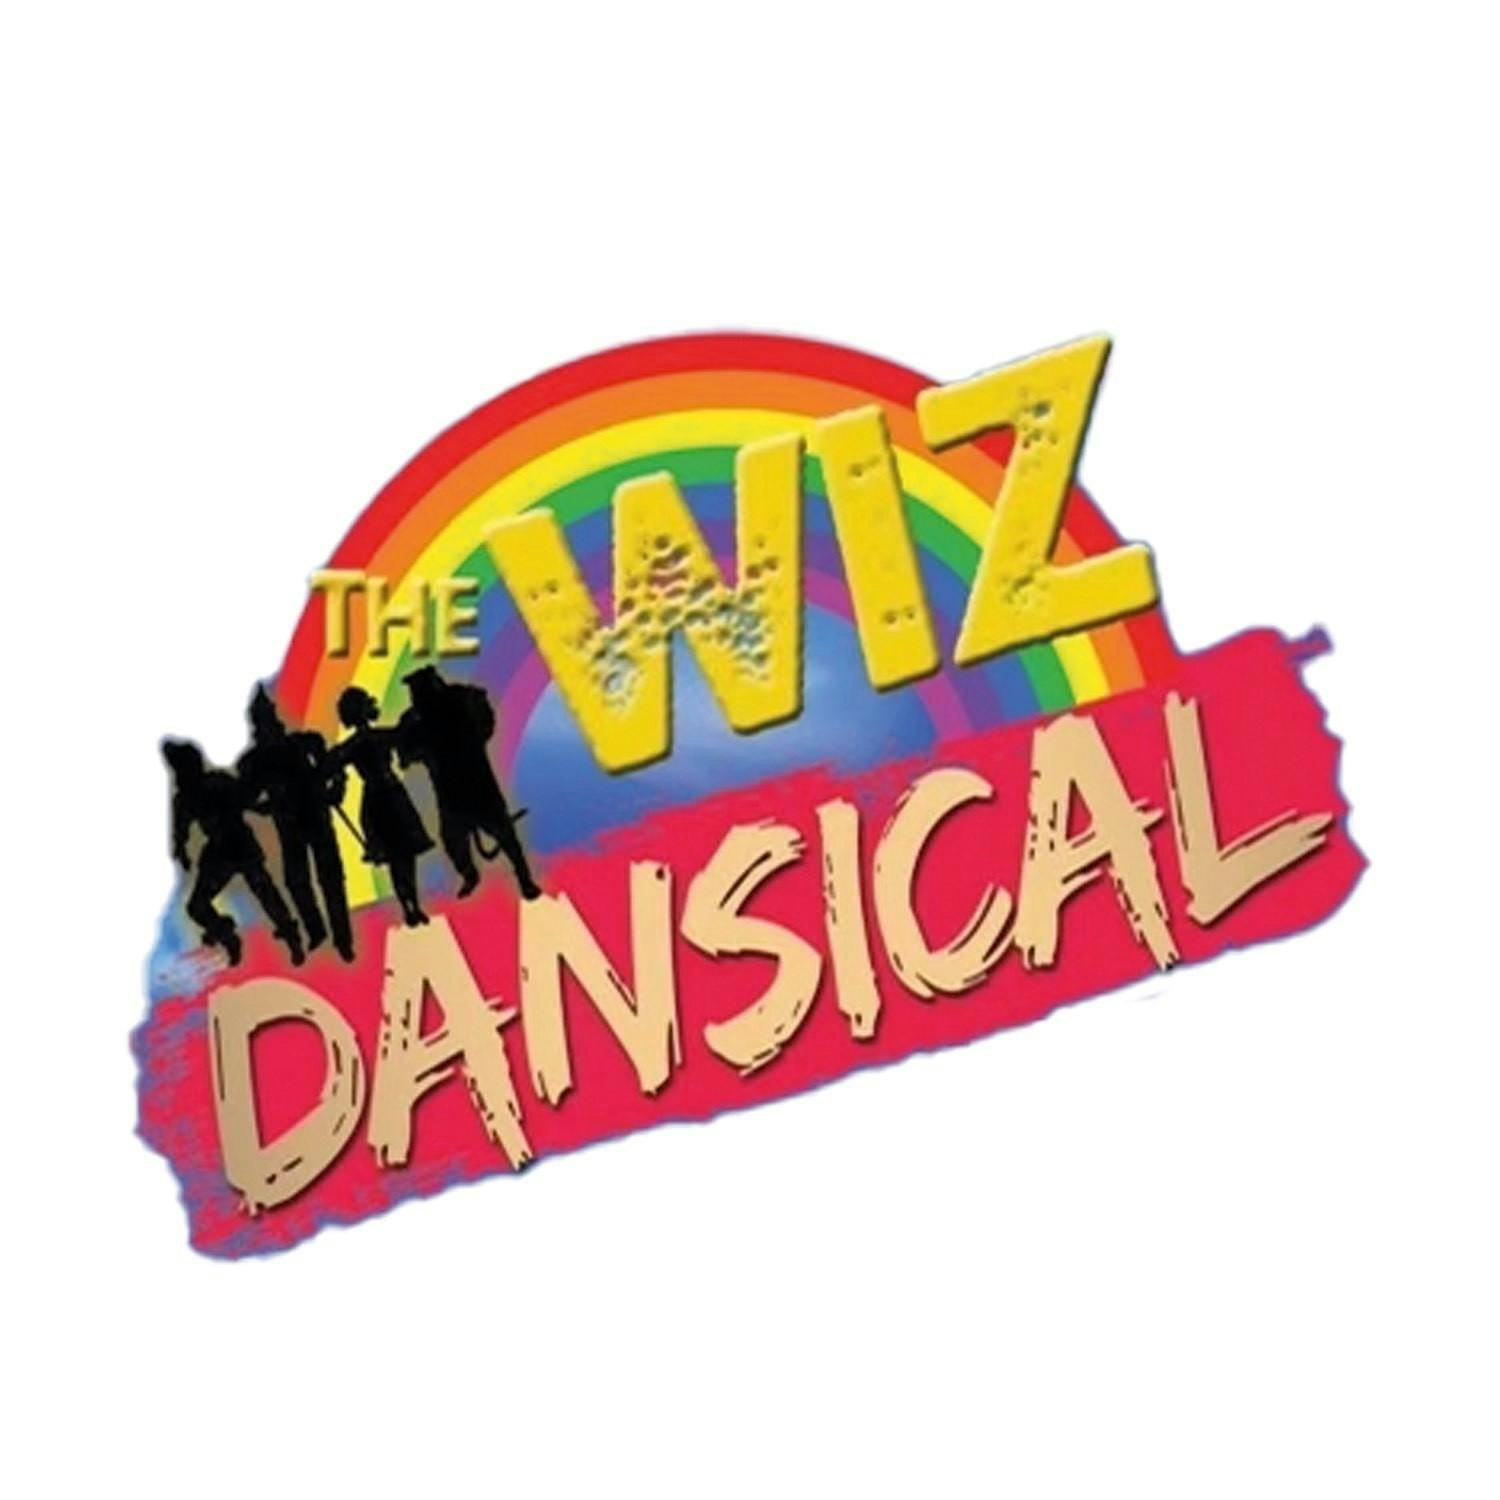 The Northeast Performing Arts Group presents "THE WIZ"  Dansical